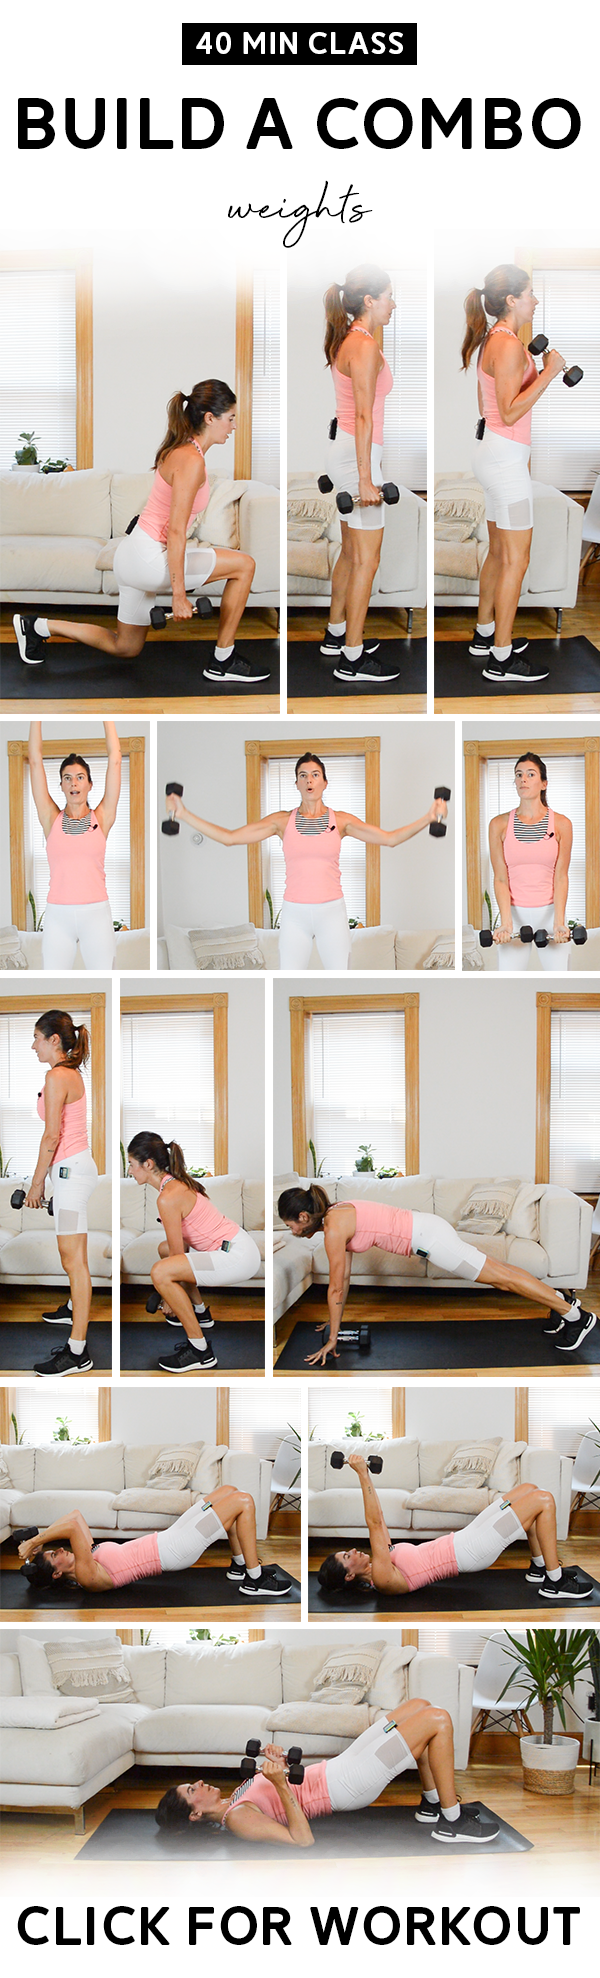 Build a Combo Class (40 Mins) – Total Body, Weights